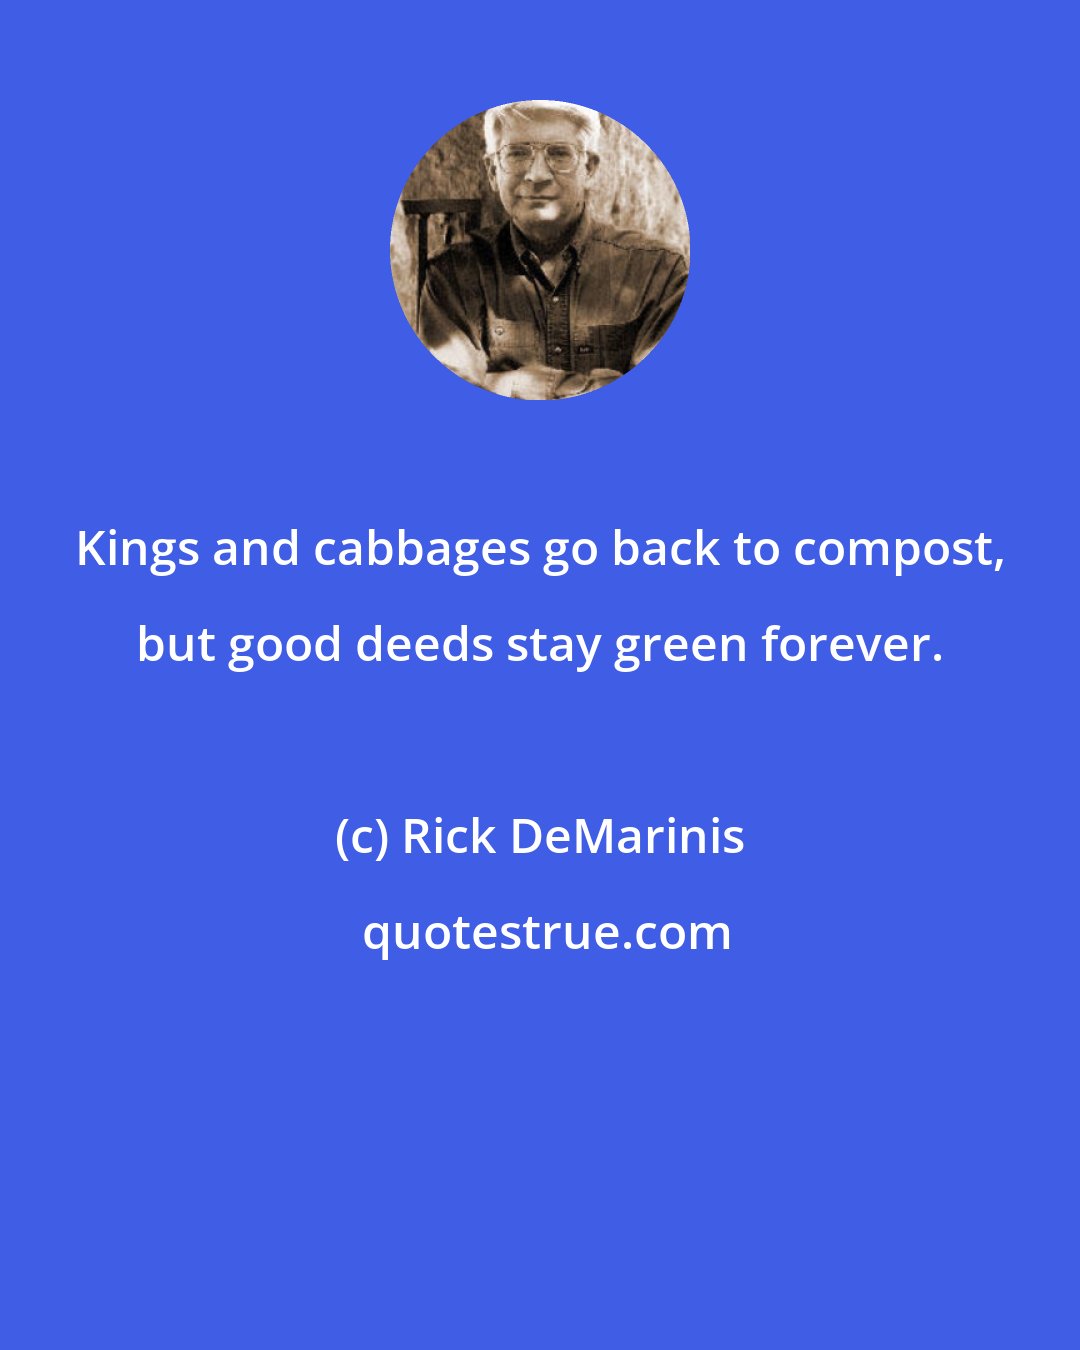 Rick DeMarinis: Kings and cabbages go back to compost, but good deeds stay green forever.